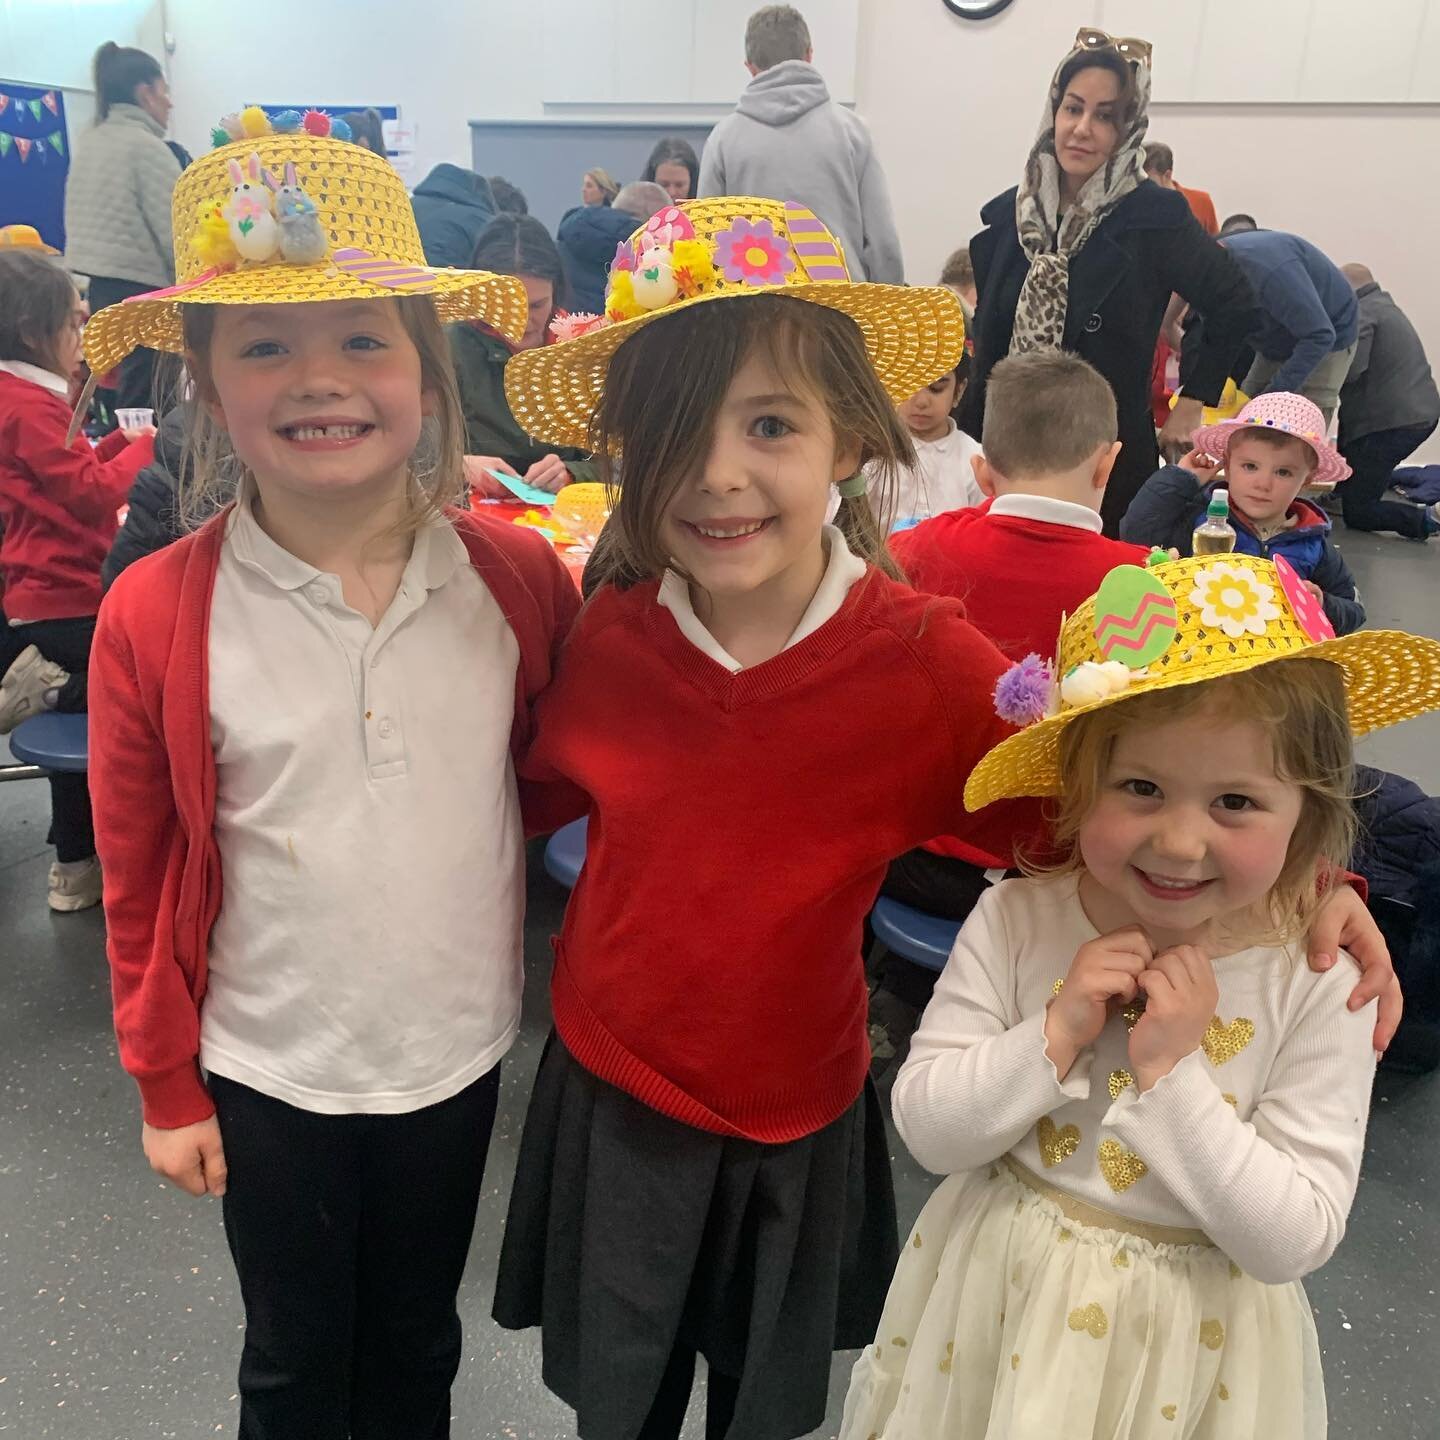 Thank you to everyone who joined us at our Easter Bonnet Crafternoon and to our wonderful volunteers for all your help! There were some amazing creations and I&rsquo;m sure they&rsquo;ll wow everyone at the bonnet parade next week! We made an amazing